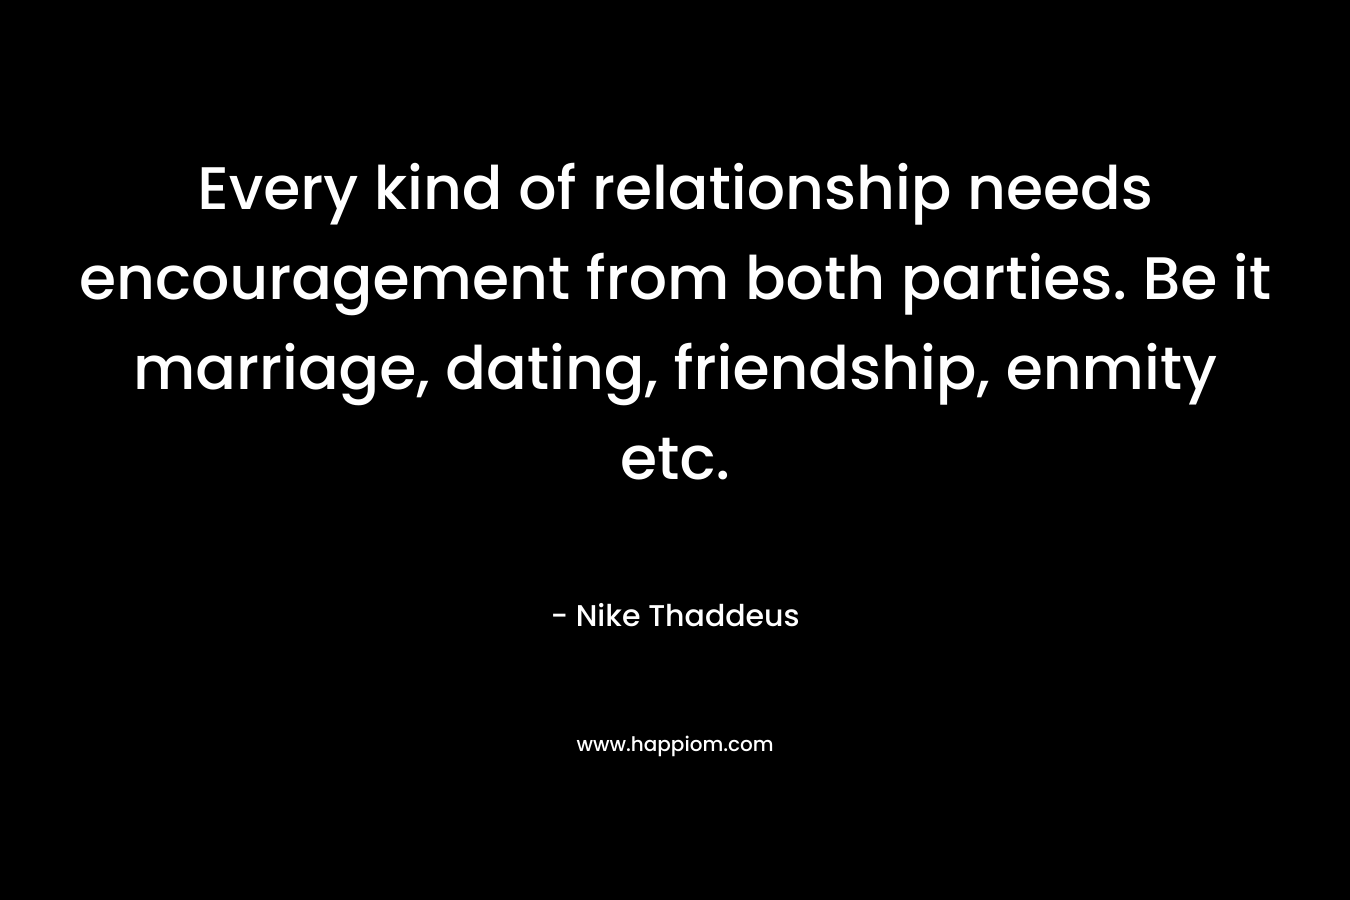 Every kind of relationship needs encouragement from both parties. Be it marriage, dating, friendship, enmity etc.